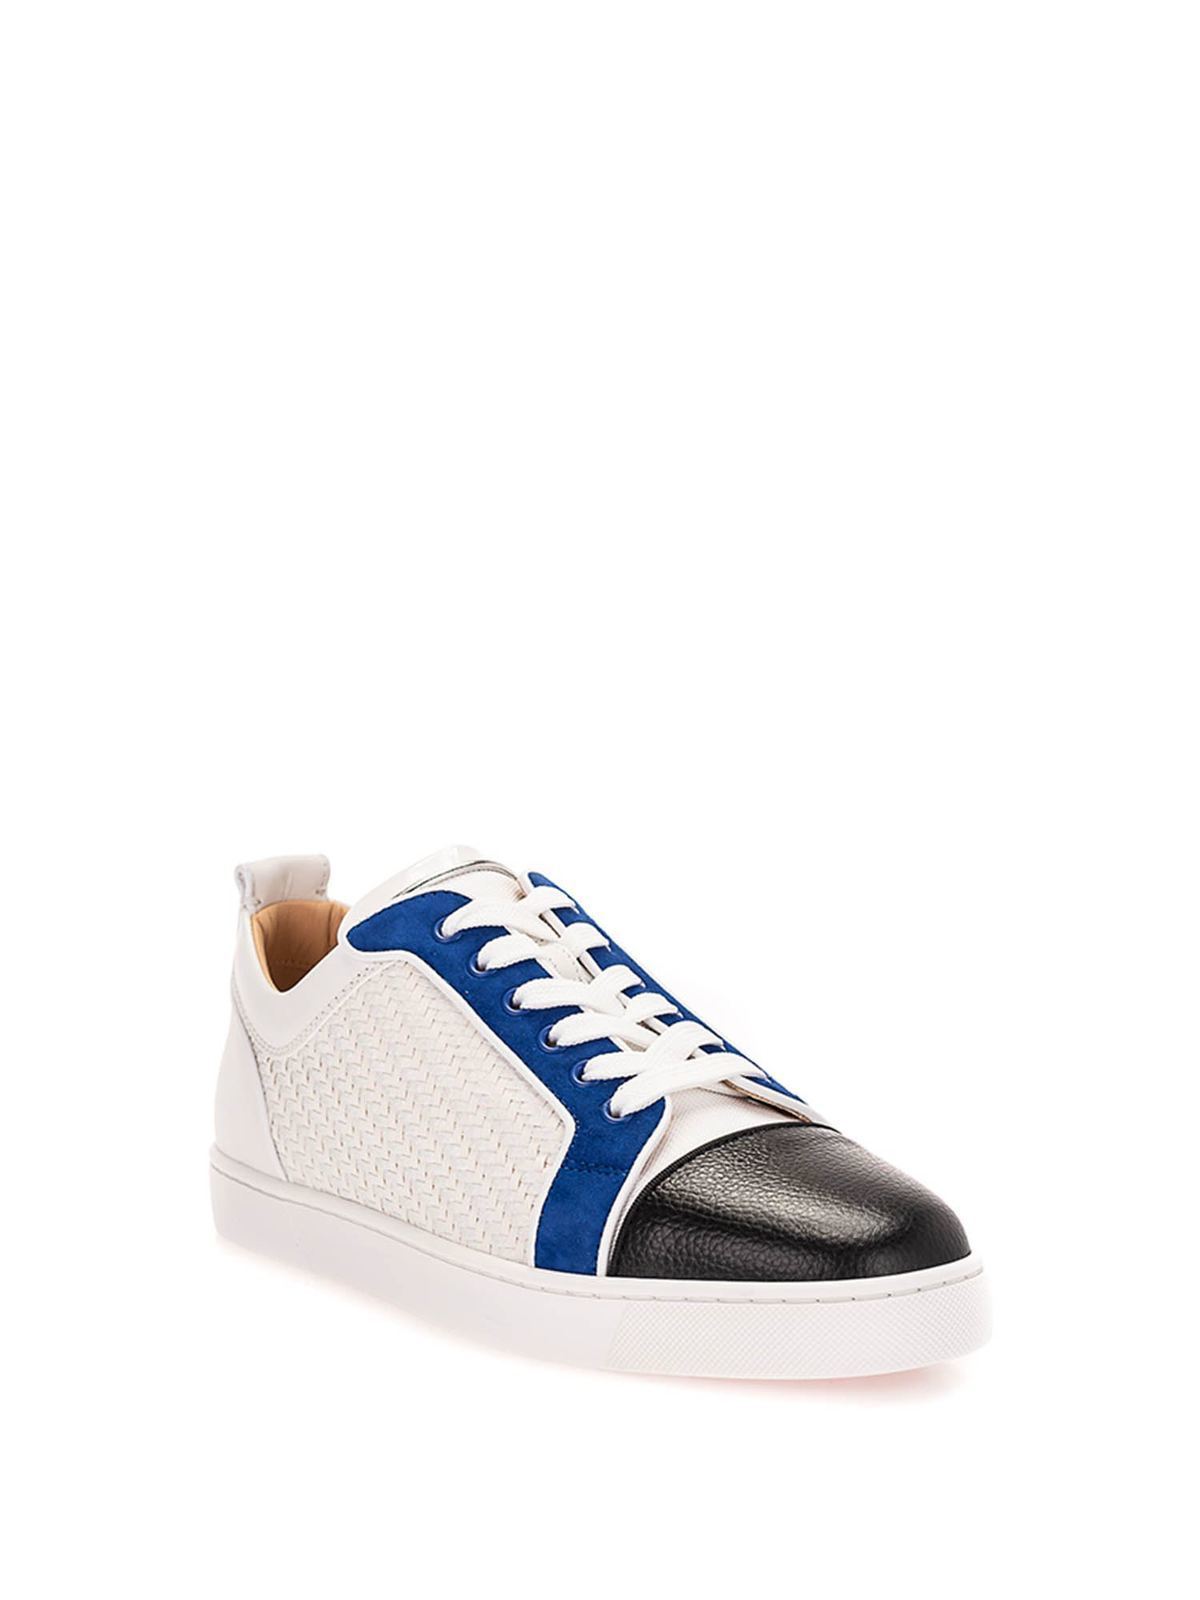 lunken Danmark Jeg spiser morgenmad Trainers Christian Louboutin - Woven sneakers in white and blue -  1210845CMA3